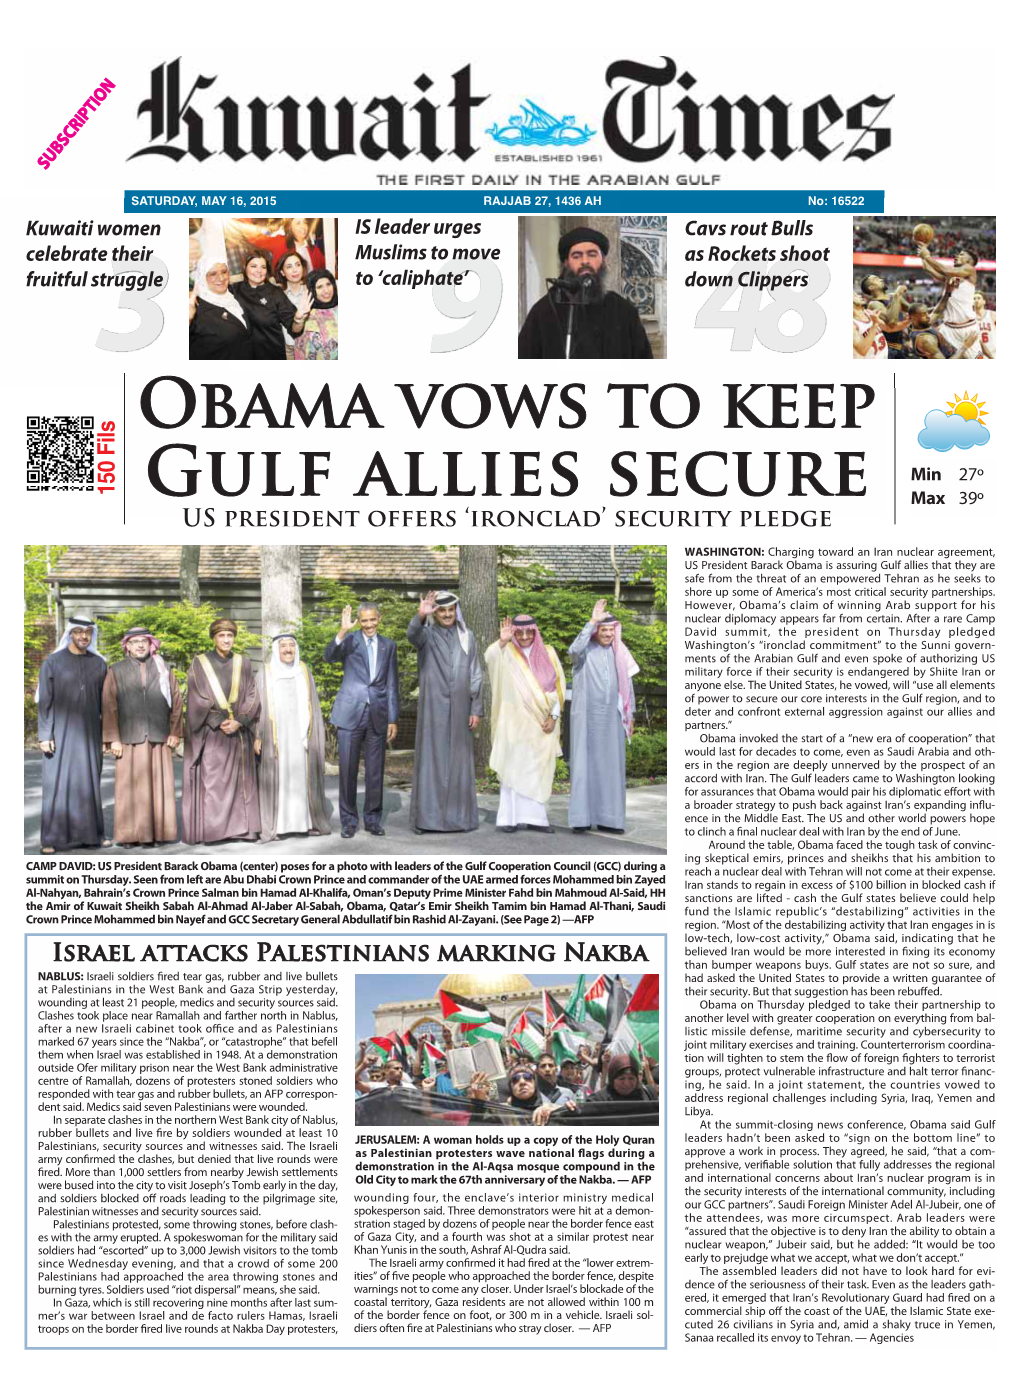 Obama Vows to Keep Gulf Allies Secure